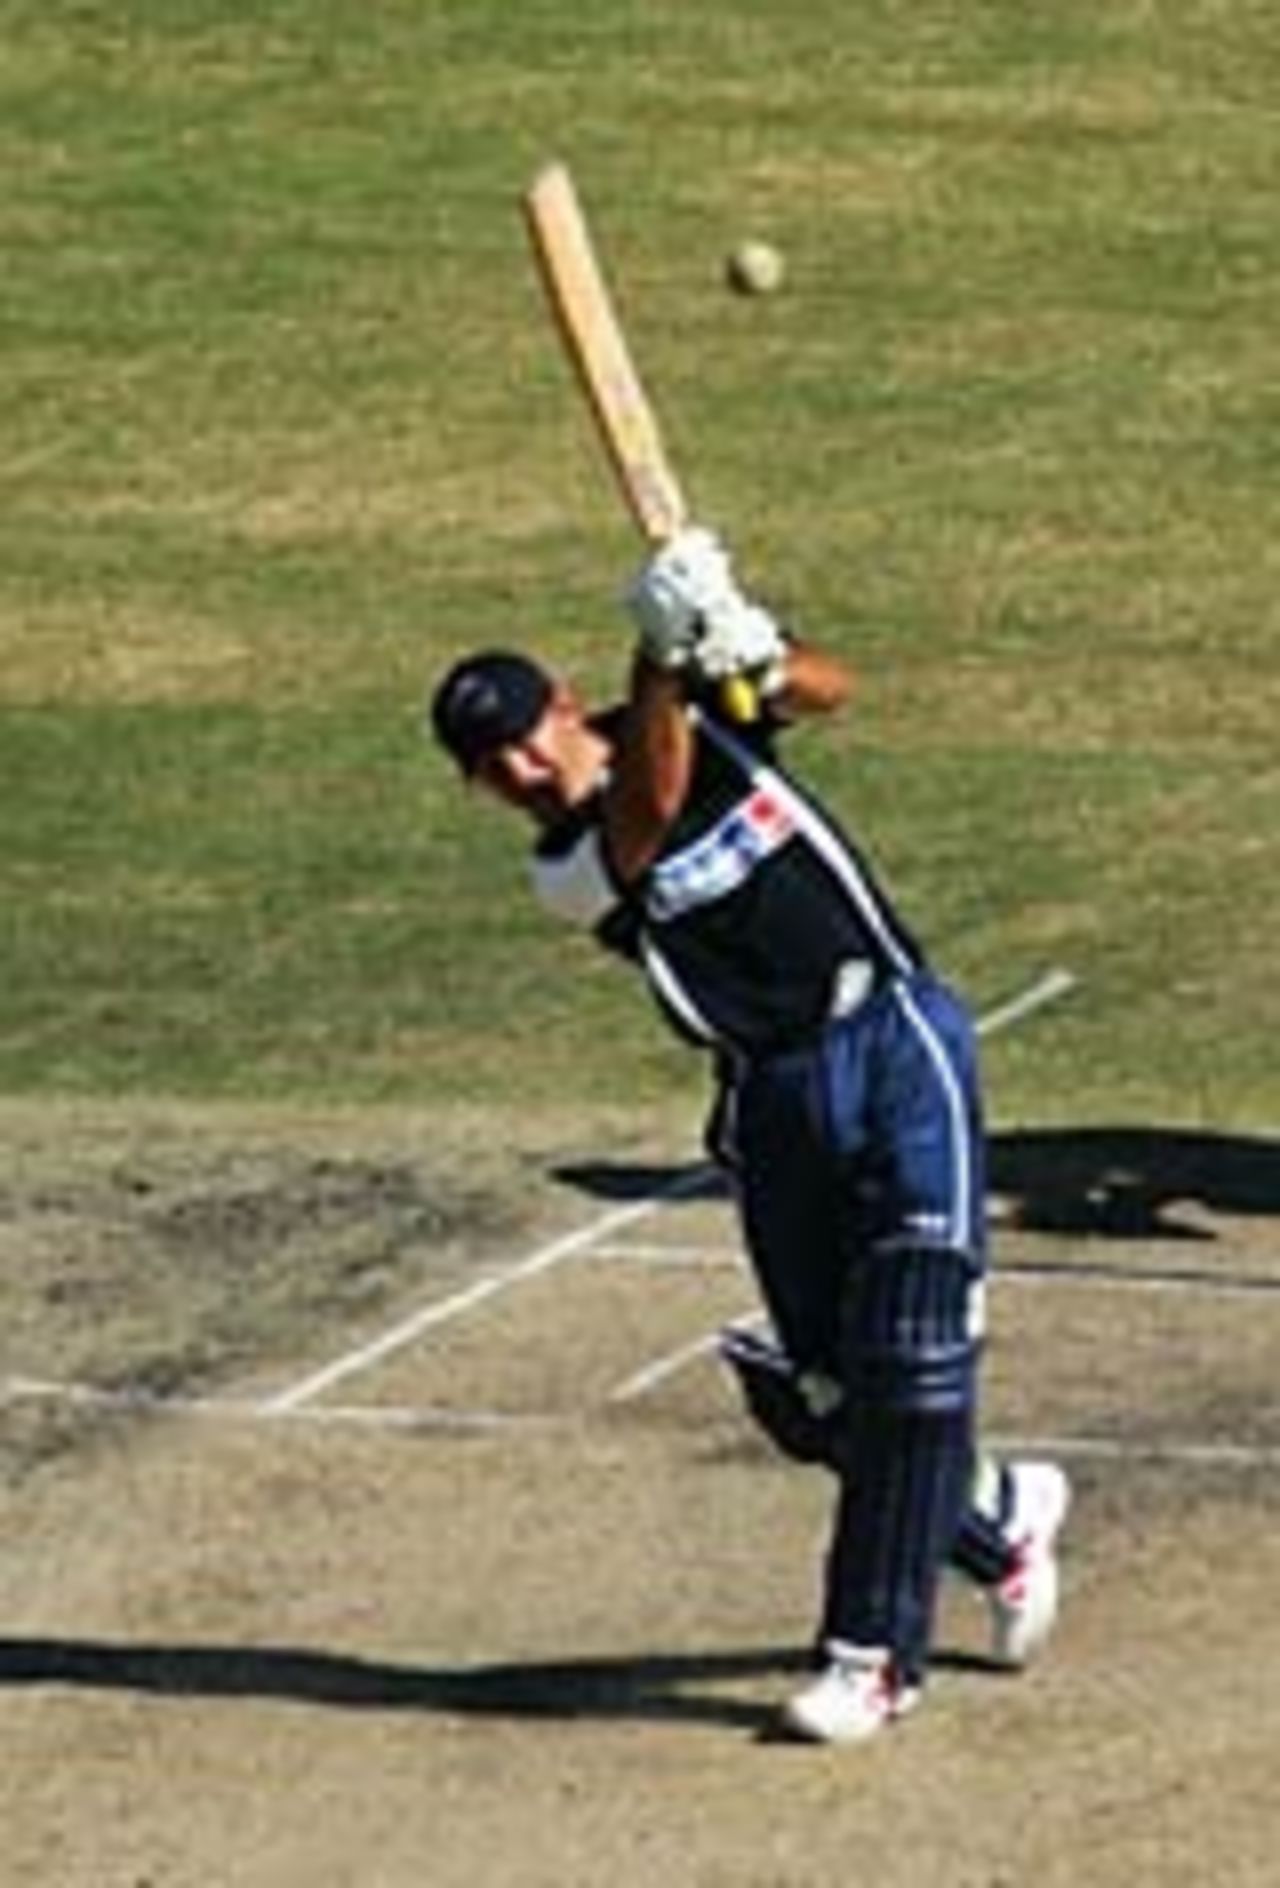 Ricky Ponting launches one, ICC World XI v ACC Asia XI ODI, Melbourne, January 10, 2005